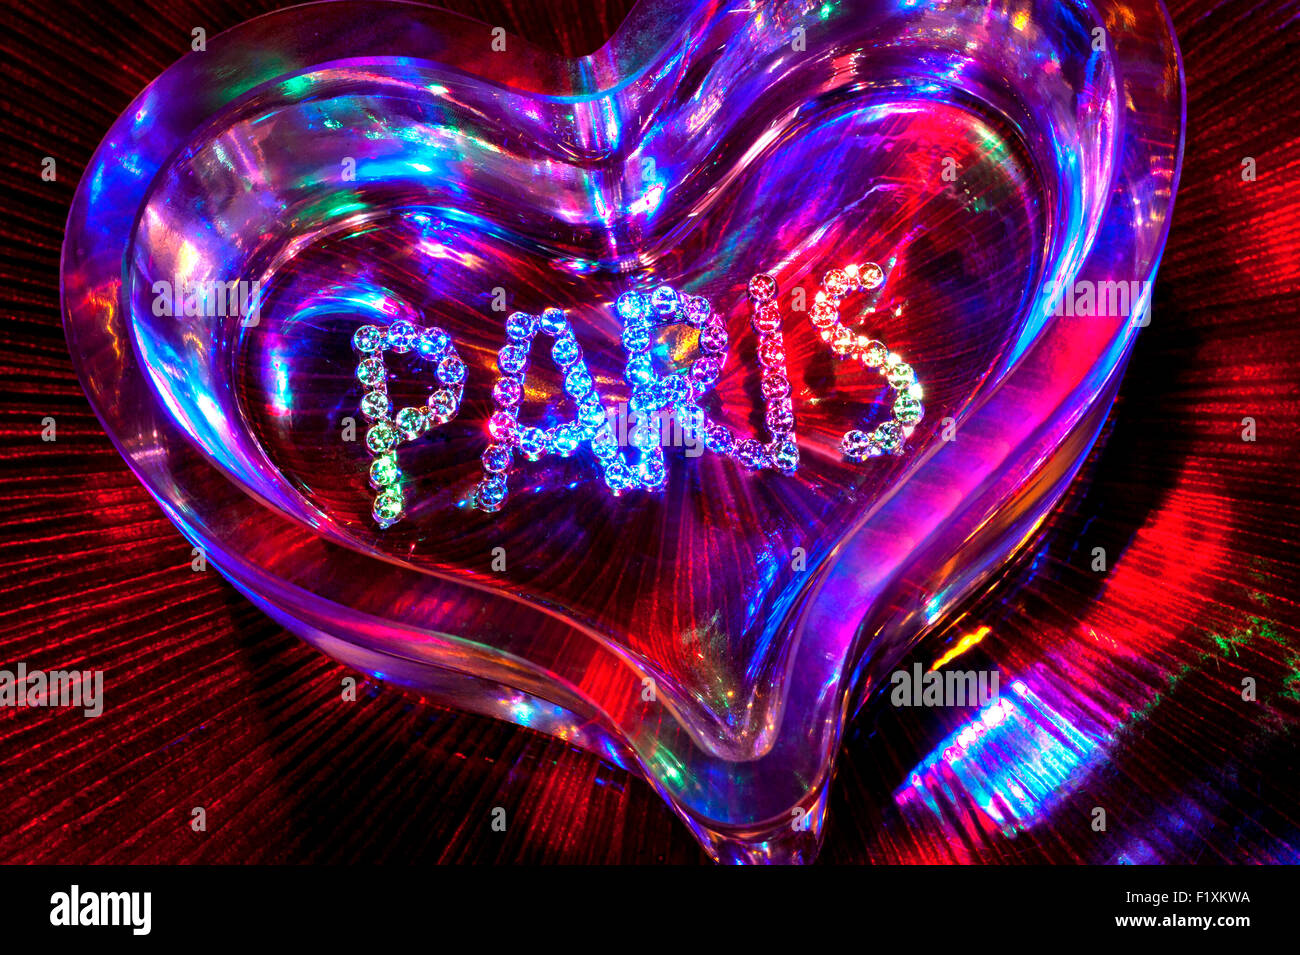 Sparkling jewel PARIS motif on heart shaped crystal glass with multicolored lighting in romantic evening situation Stock Photo